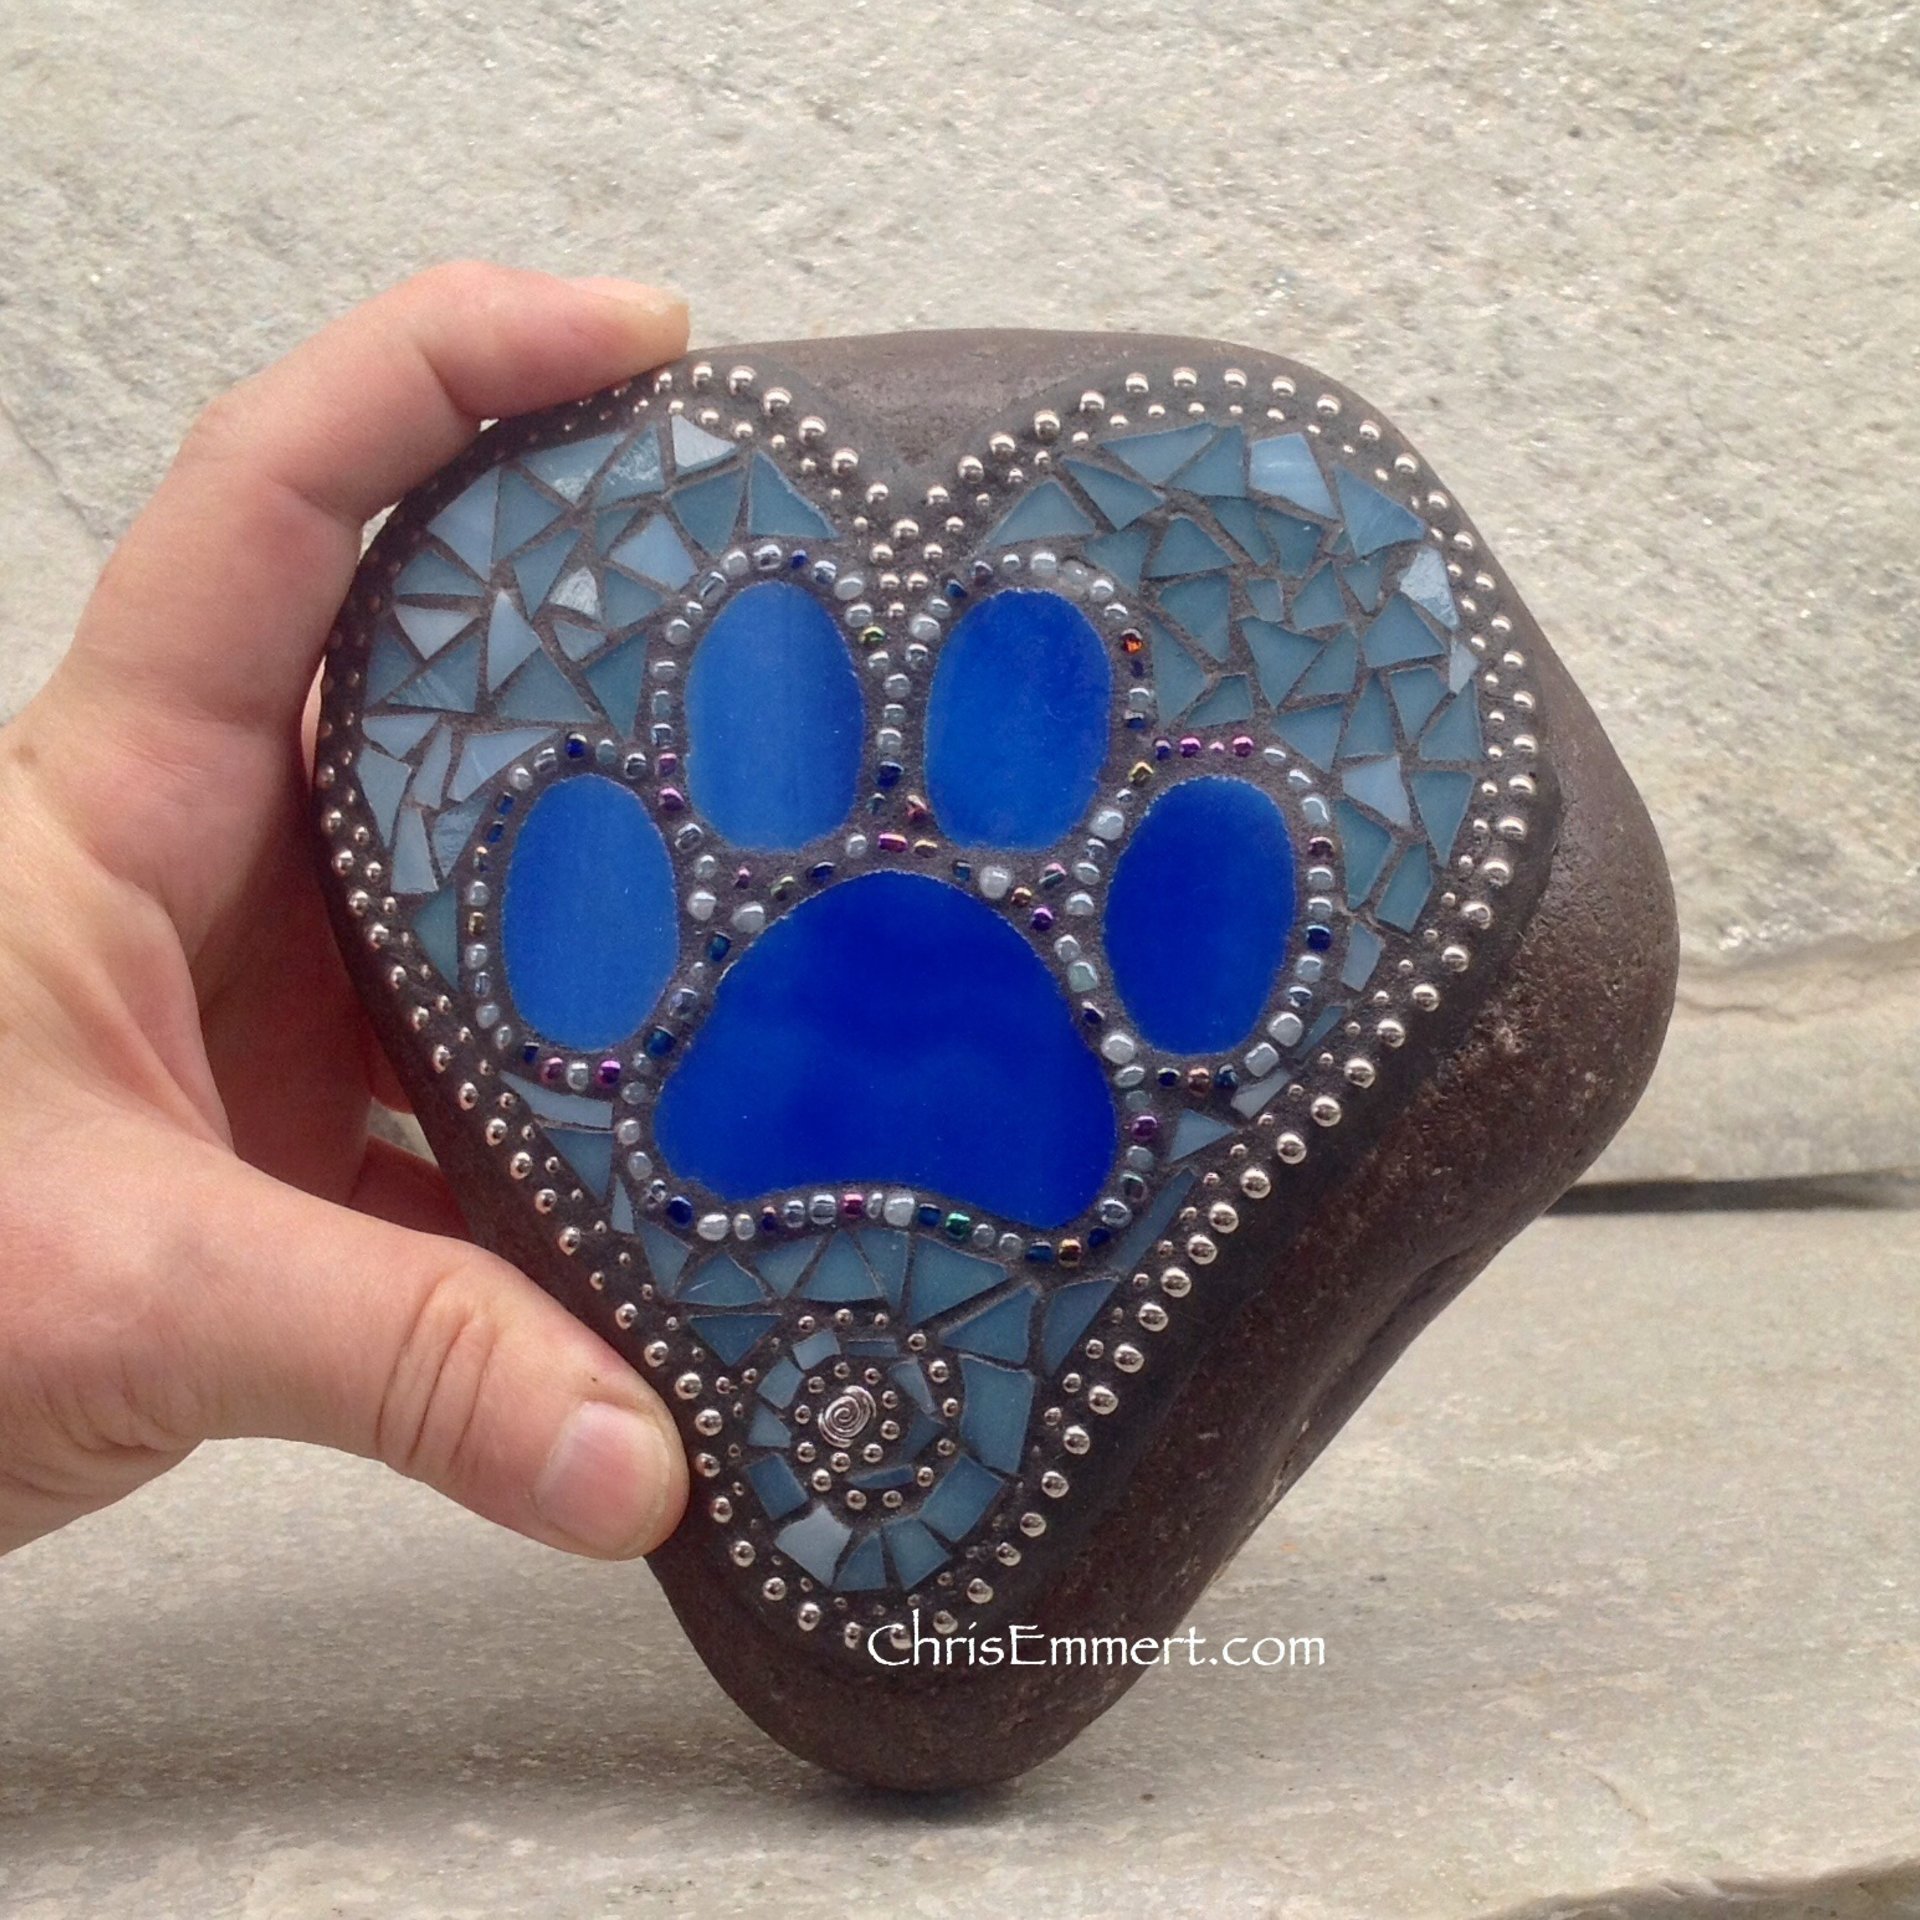 Get a Custom Heart with a Paw Print - Garden Stone